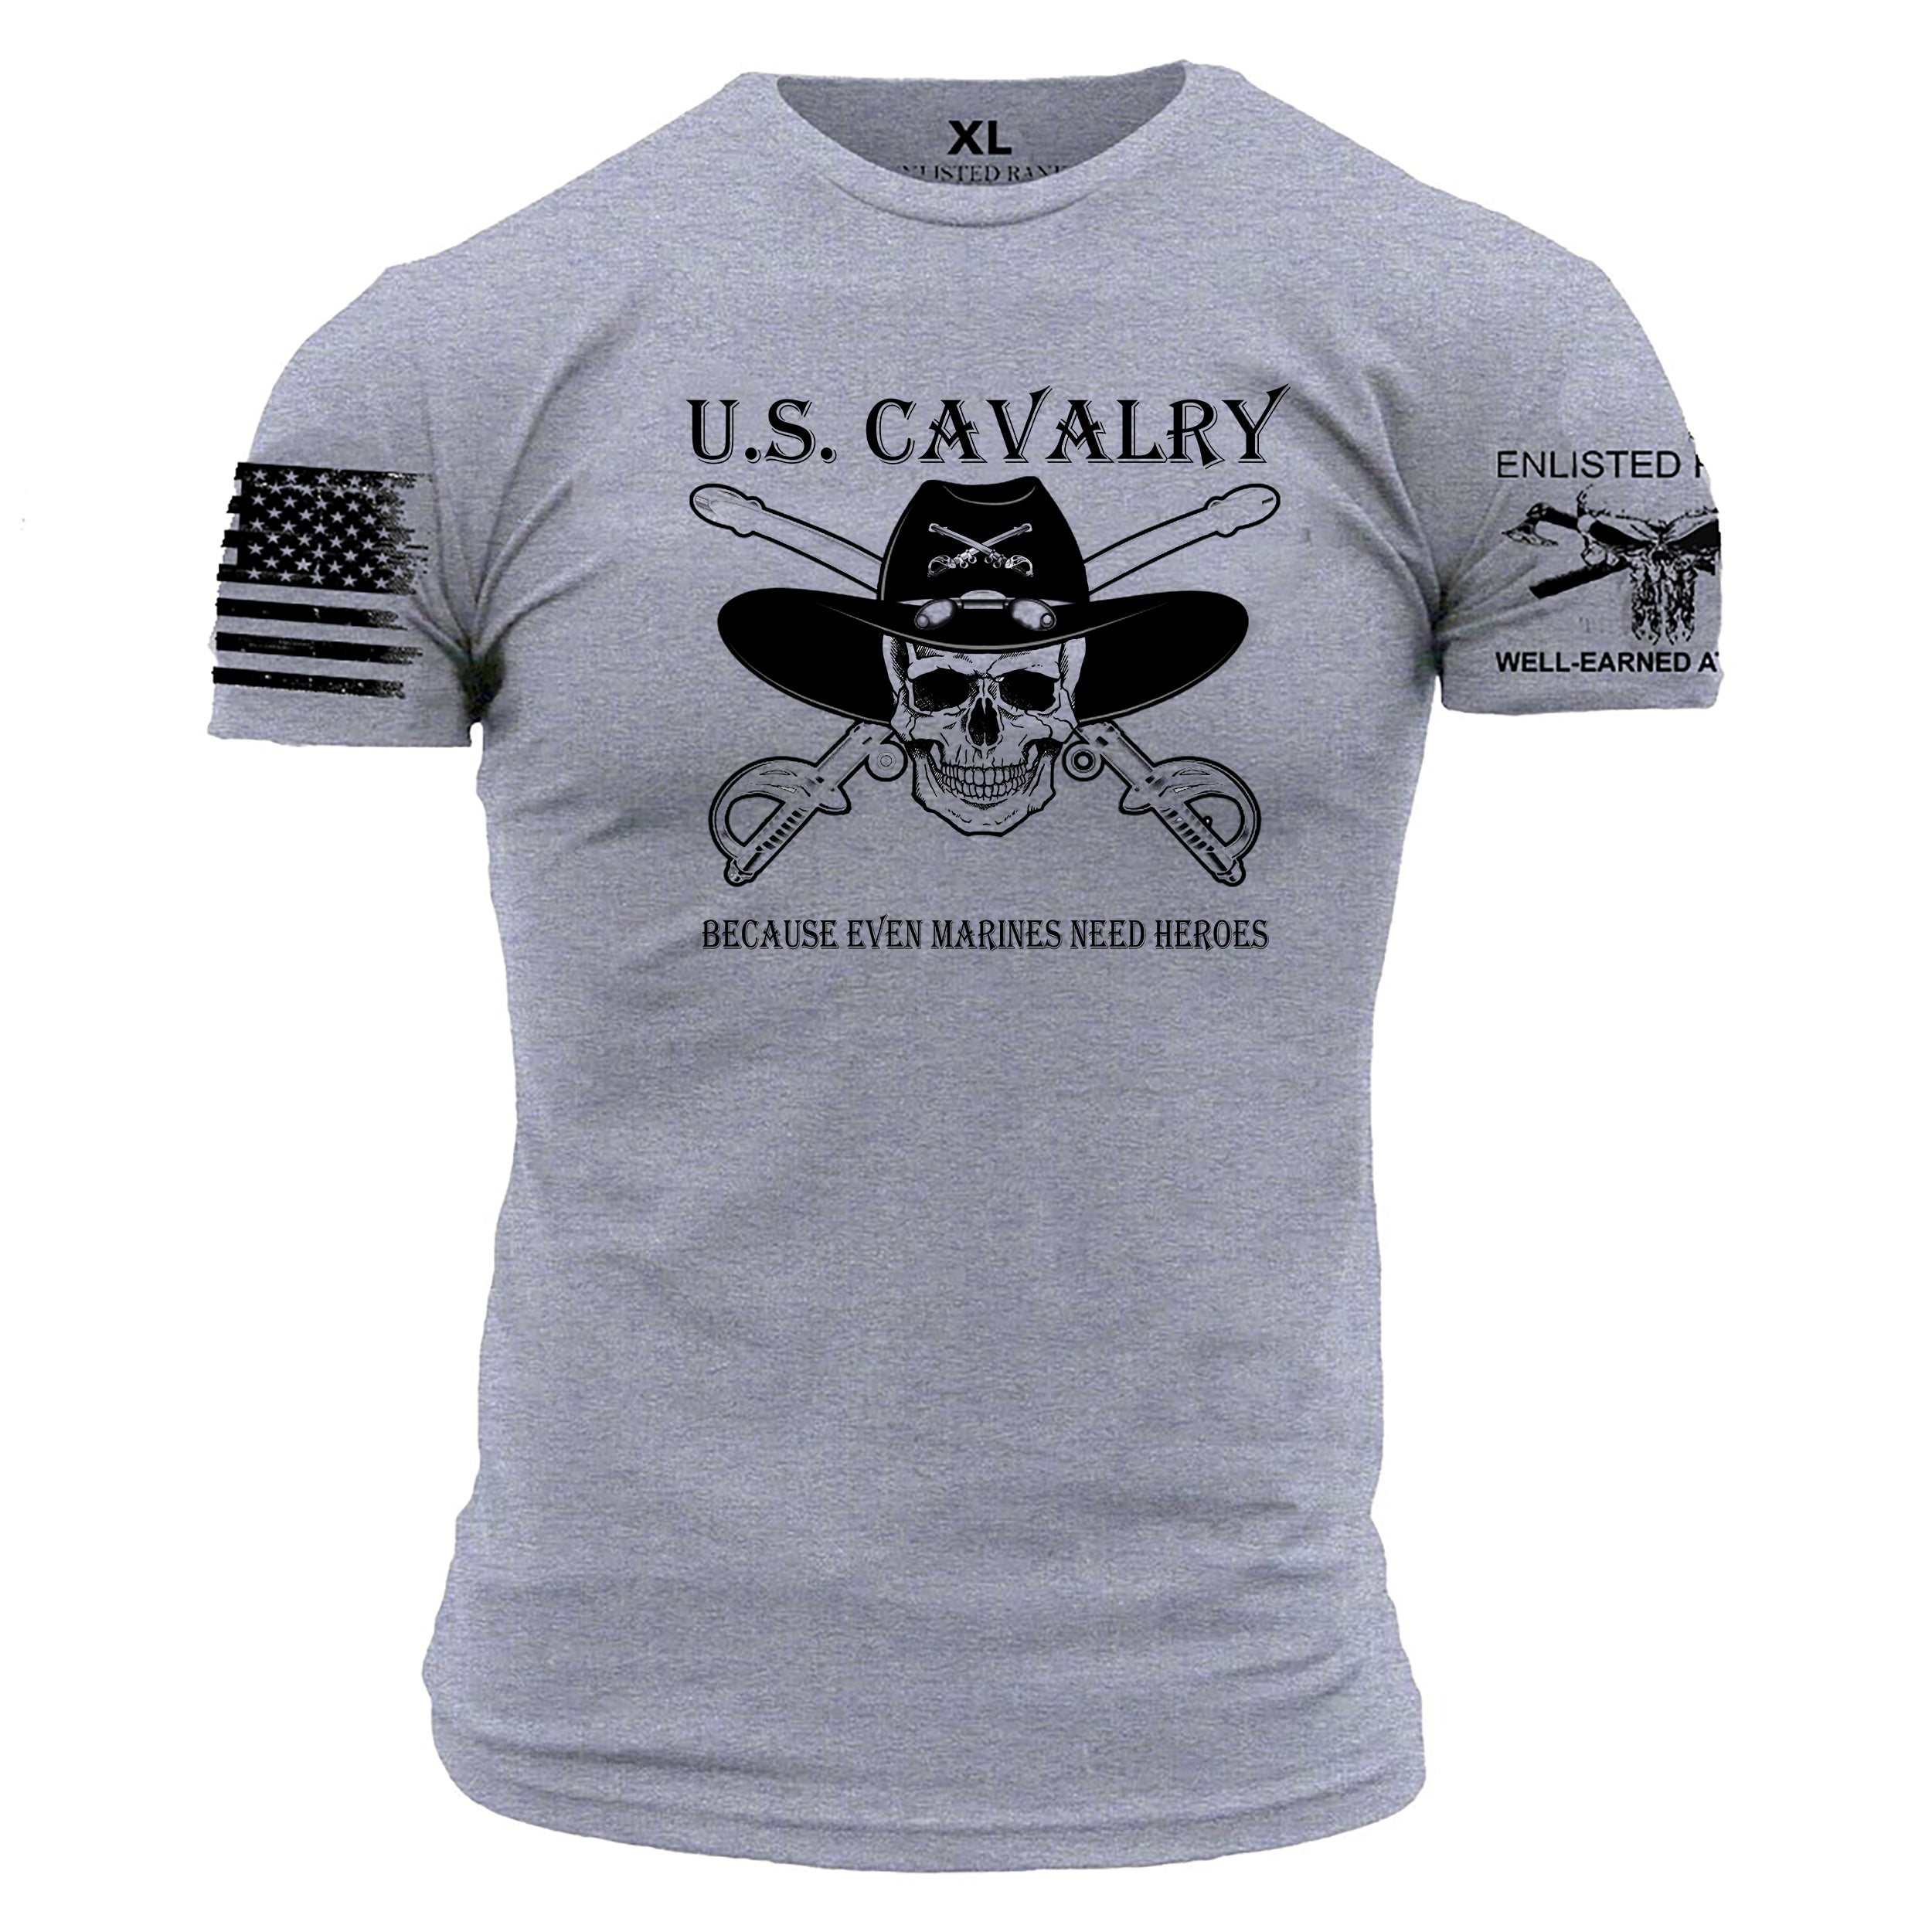 CAVALRY HEROES, Enlisted Ranks graphic t-shirt